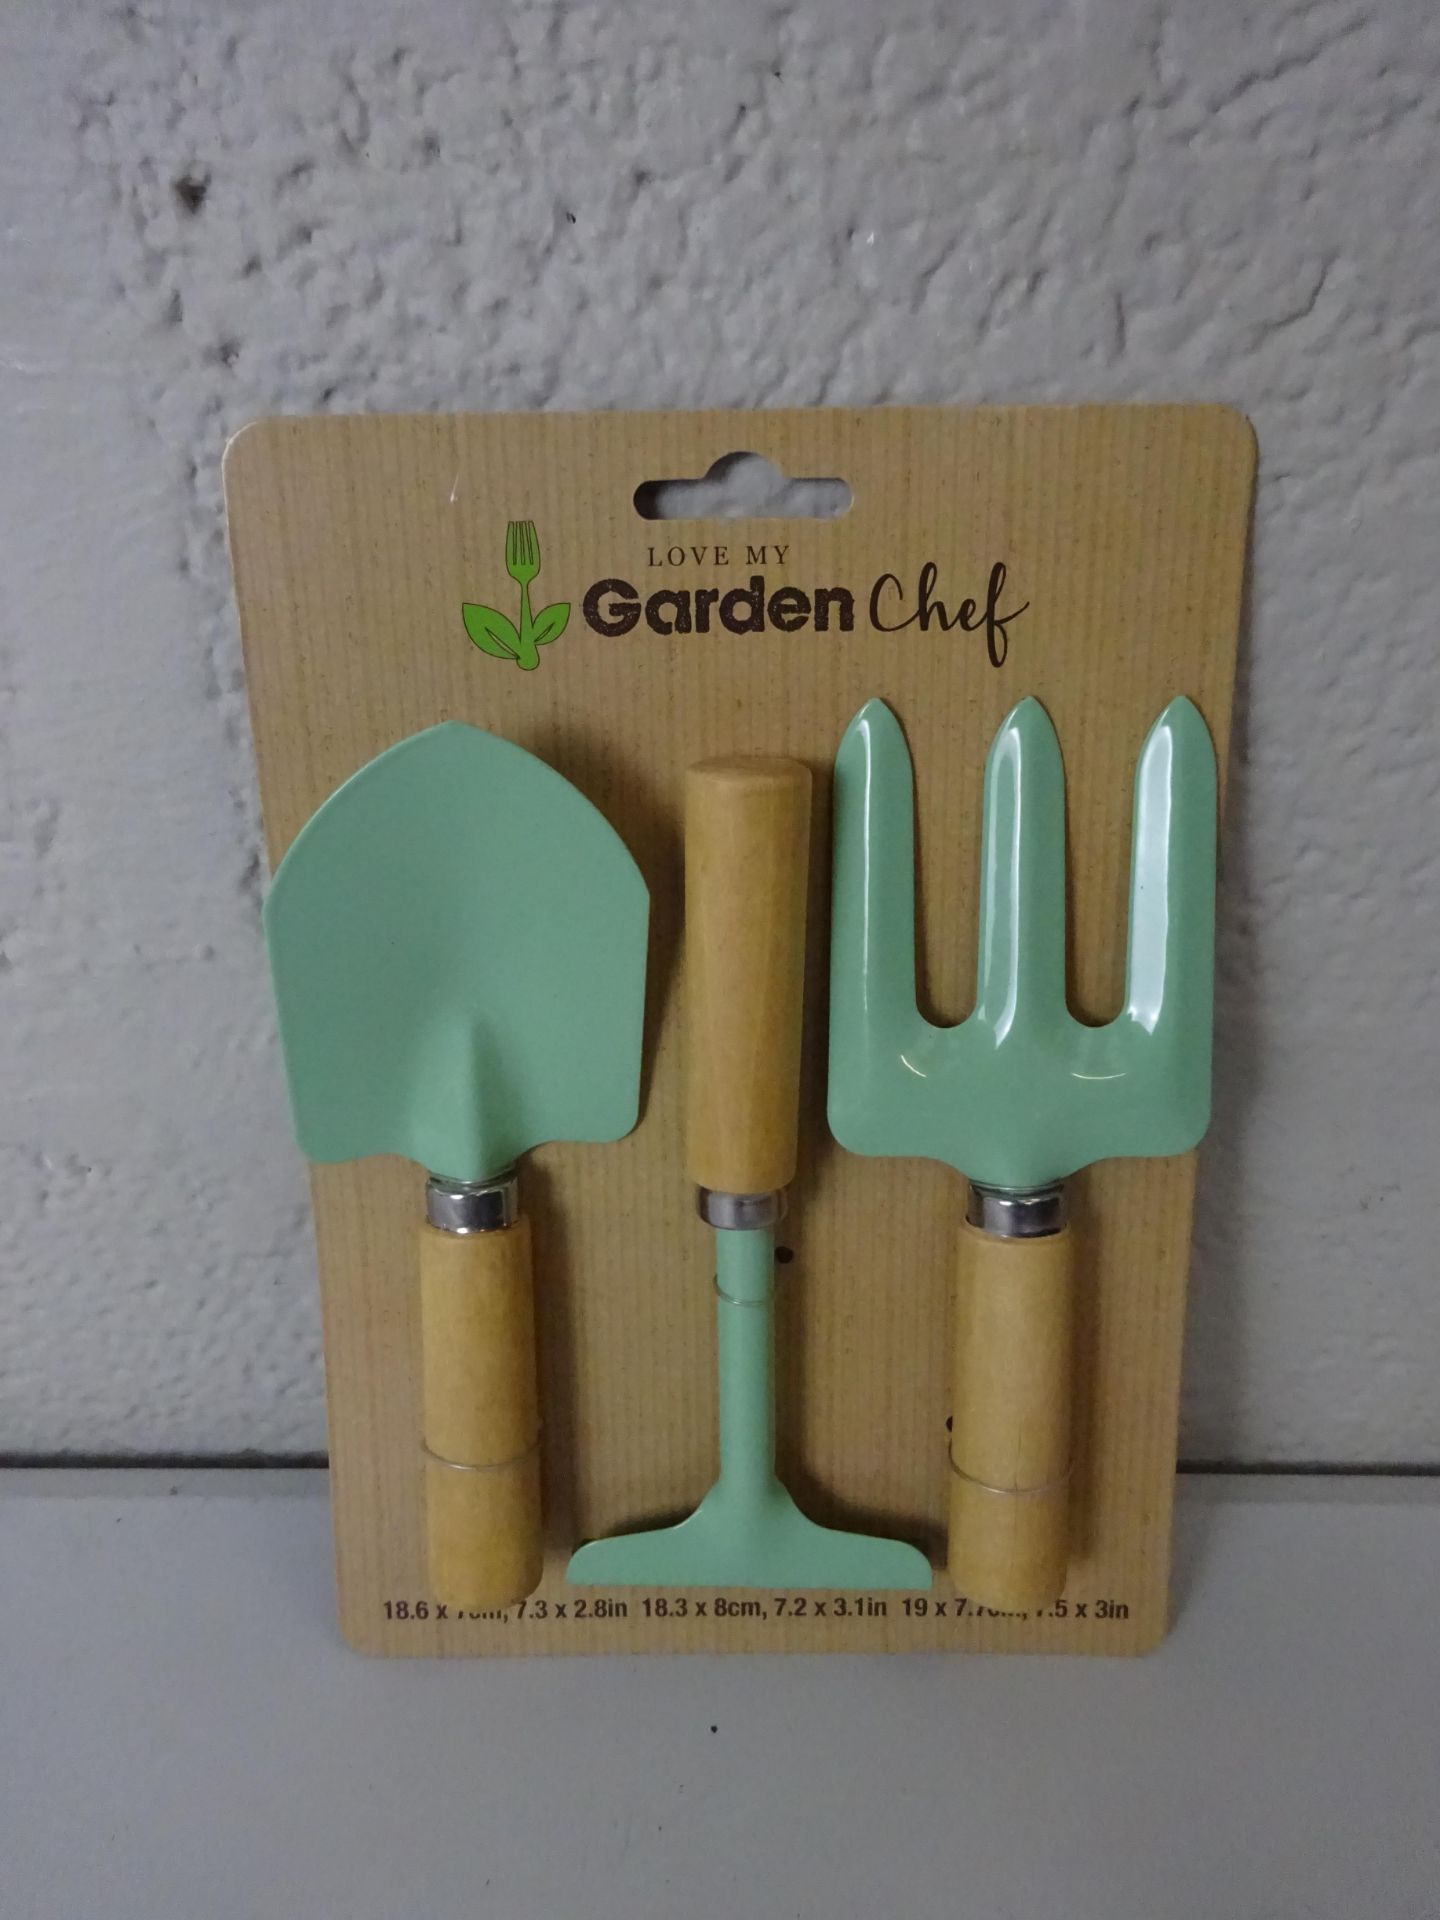 BRAND NEW MINI GARDEN SETS WITH SPADE, RAKE AND FORK